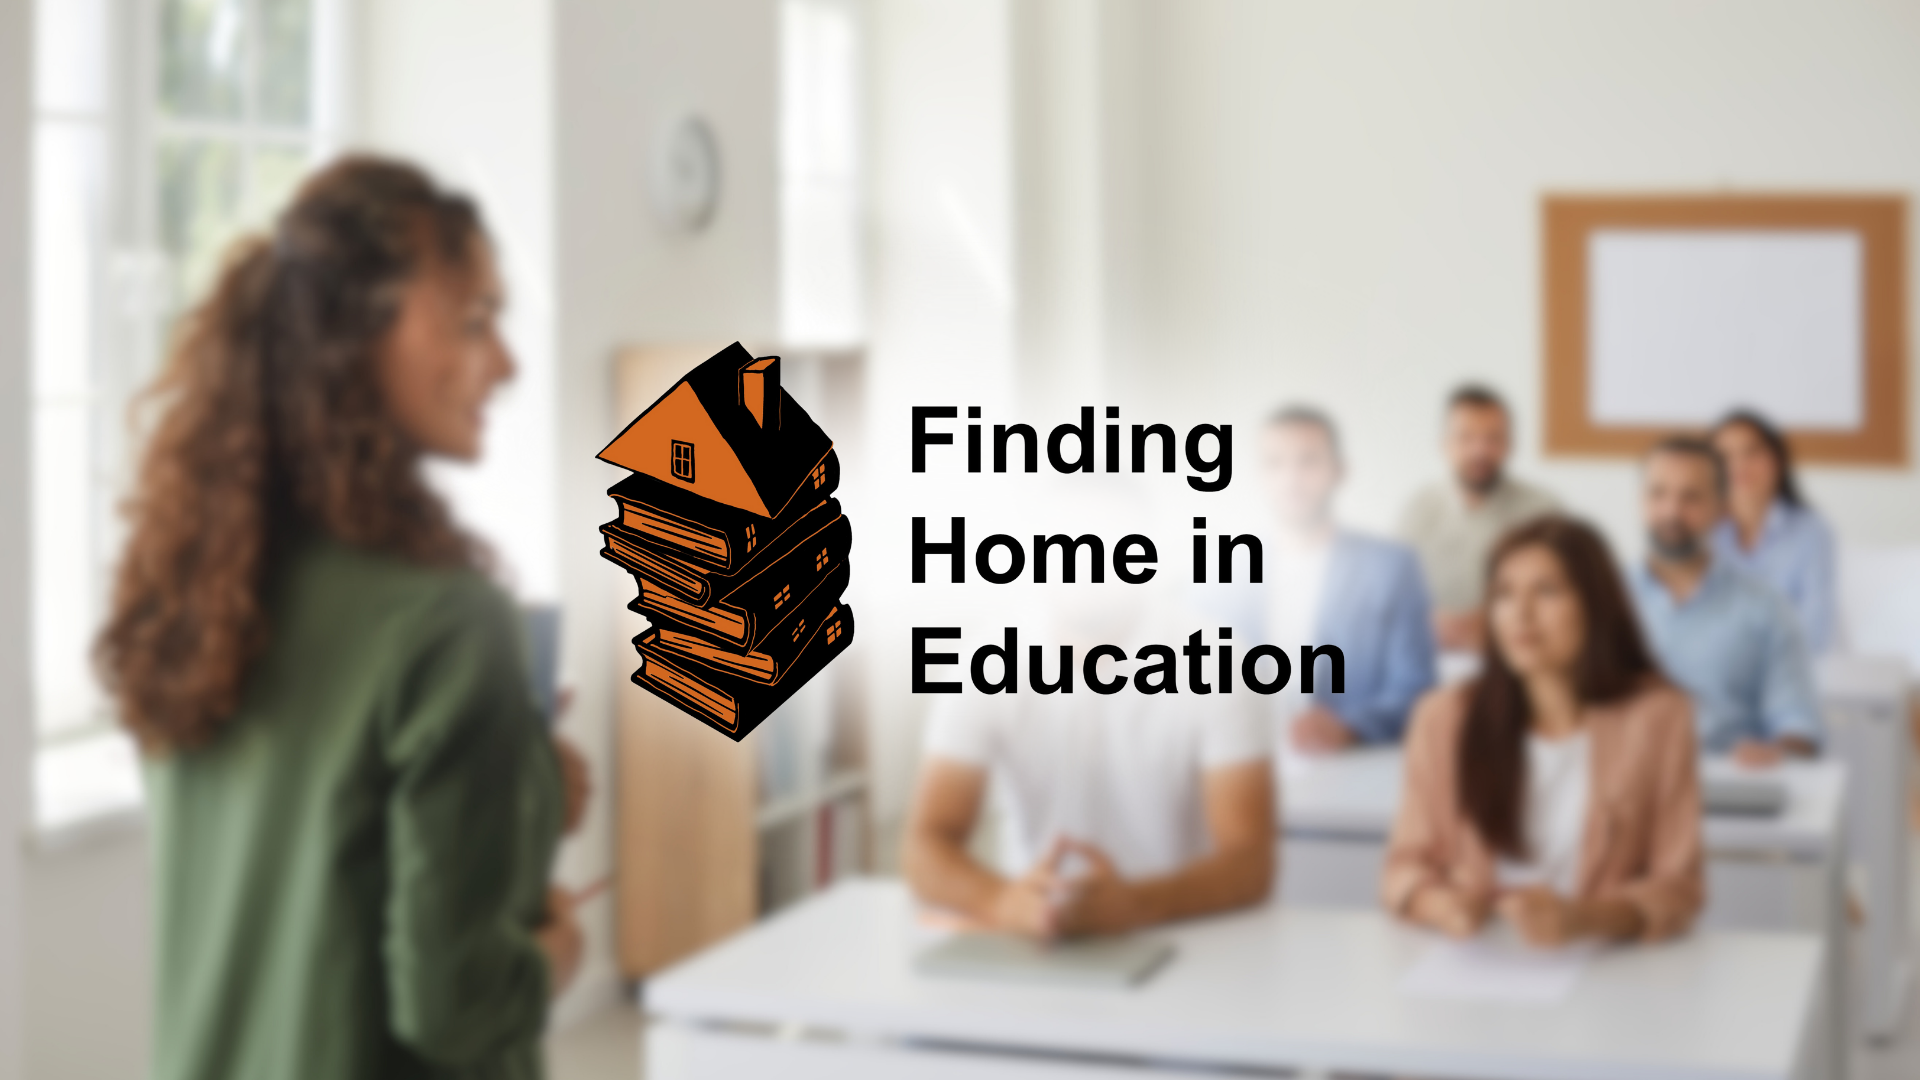 Oxford International Support for the "Finding Home in Education" Project 